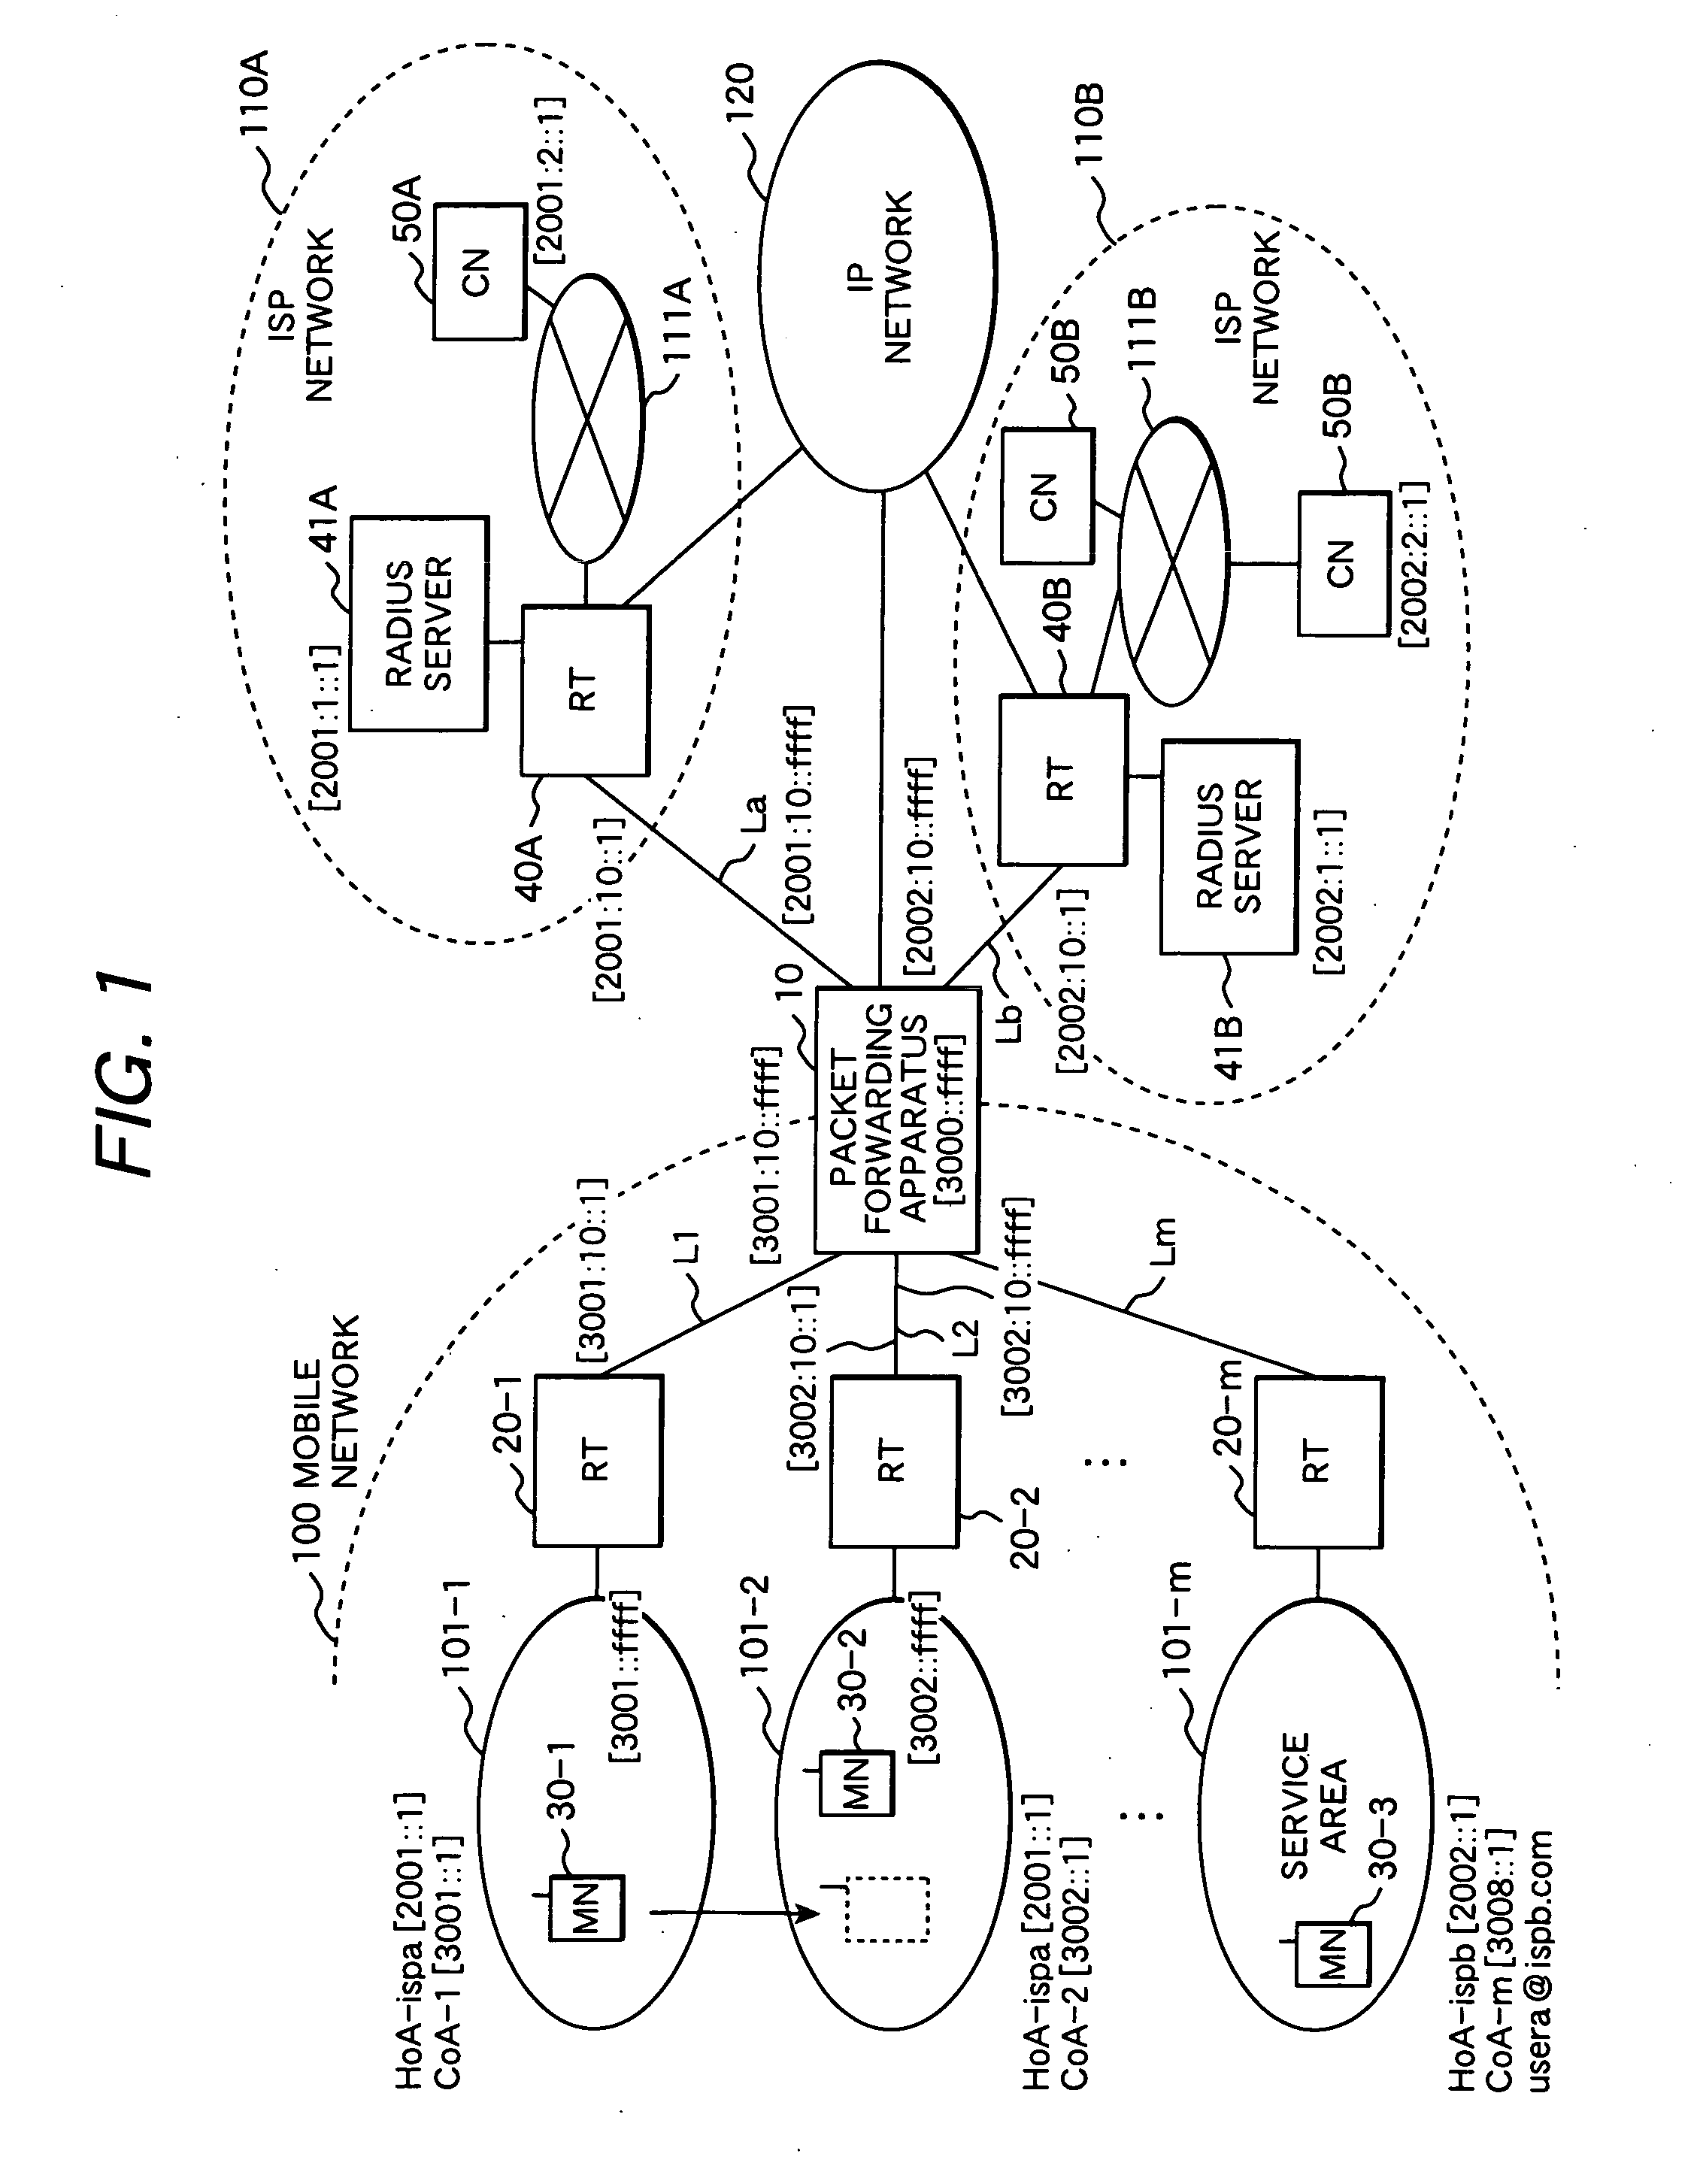 Packet forwarding apparatus for connecting mobile terminal to ISP network